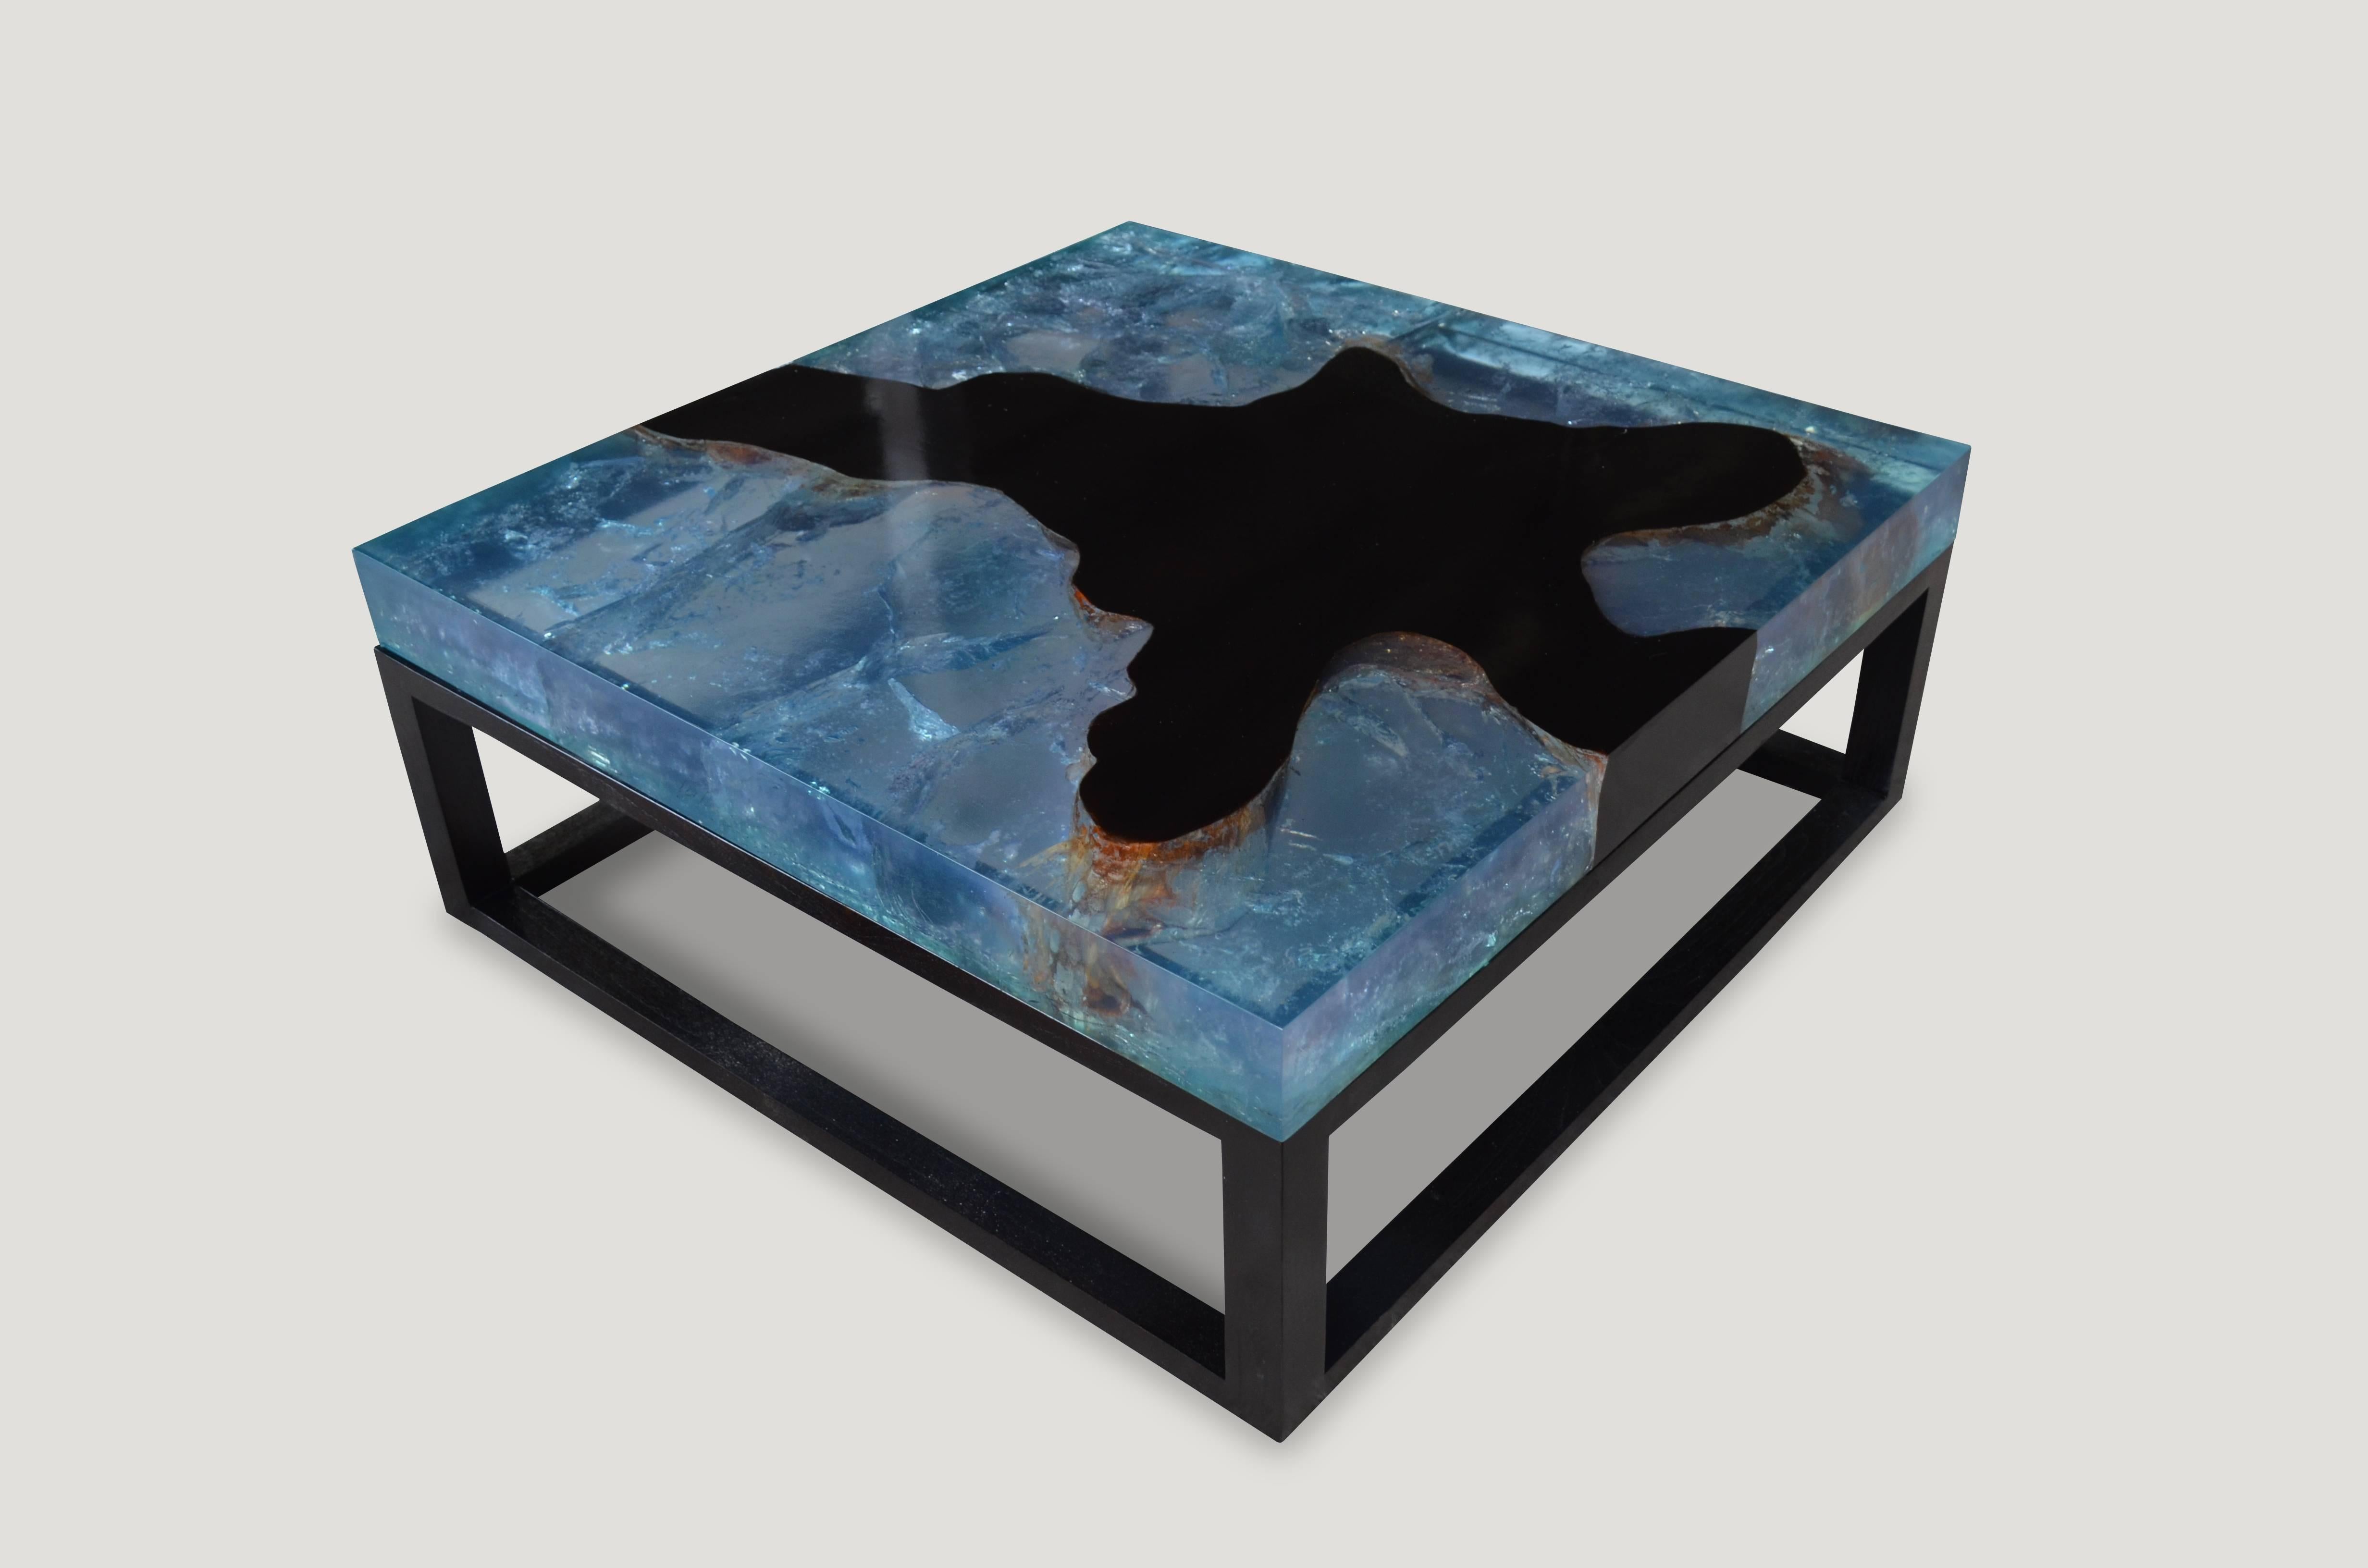 The cracked resin coffee table is made from teak wood infused with resin. A dramatic piece due to the four inch depth of the resin, which resembles a unique quartz crystal with many different facets. An impressive addition to any space. Currently a